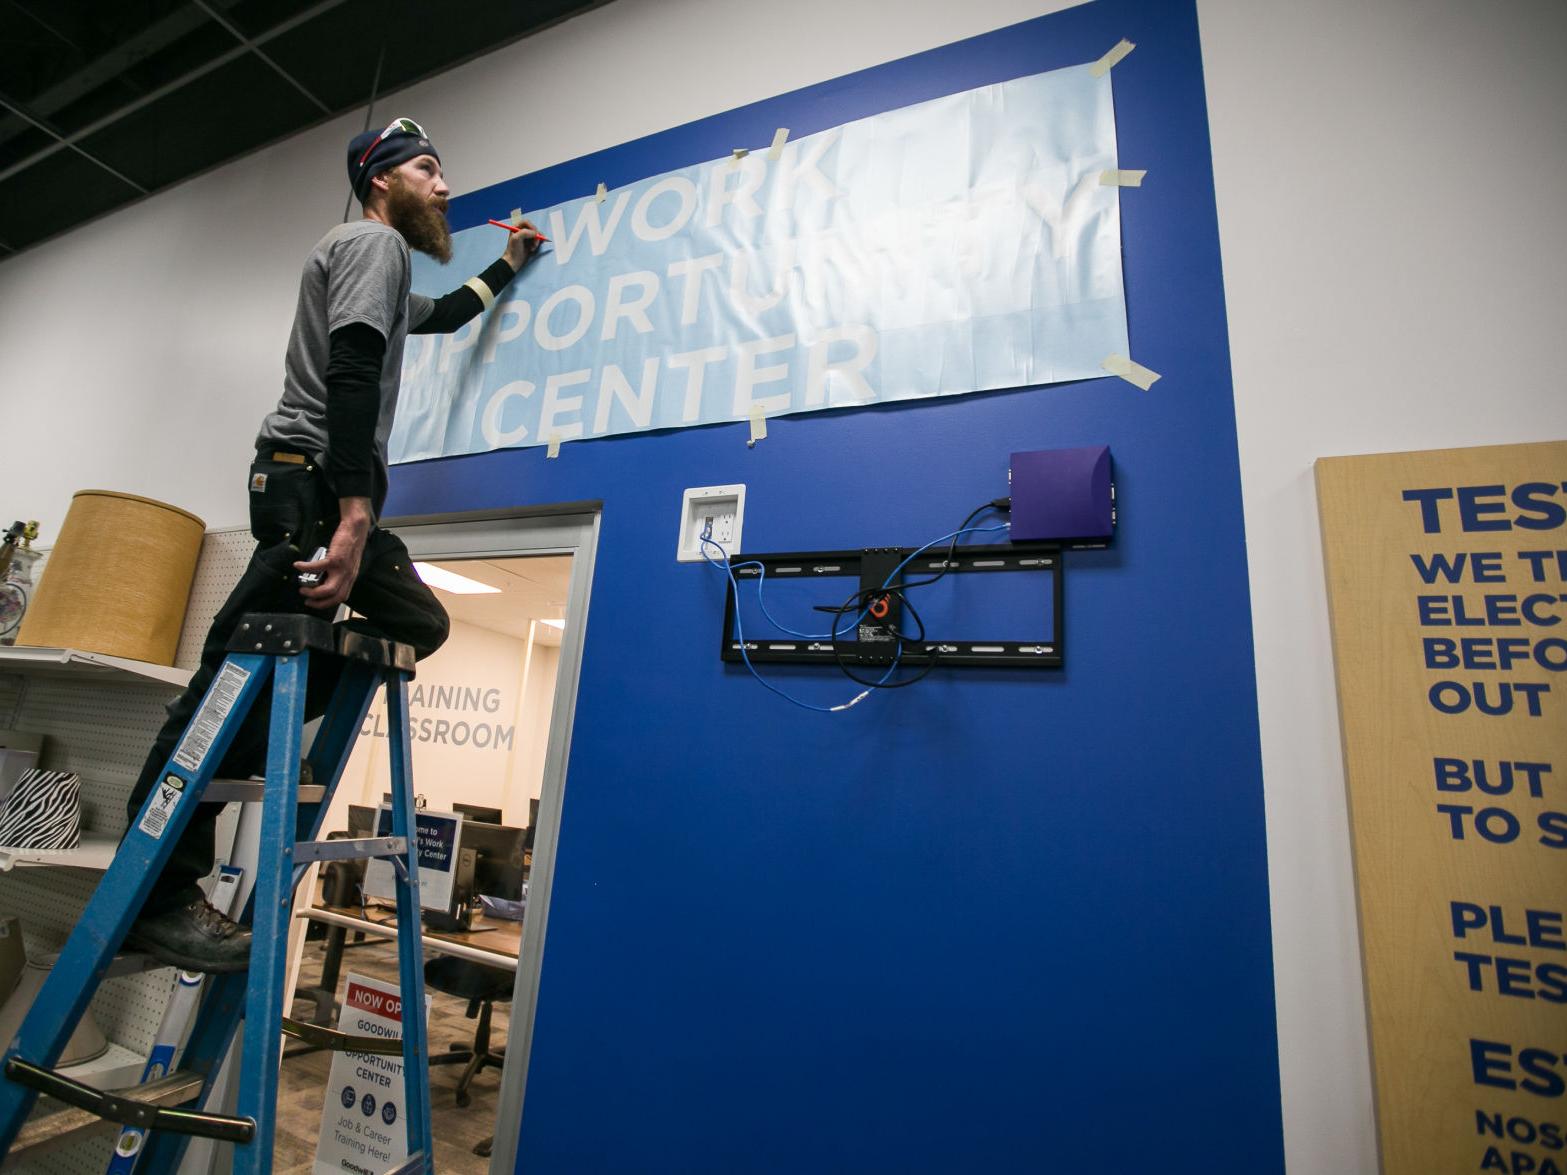 Goodwill Launches Yakima Career Center With Free Two Day Workshop News Yakimaherald Com